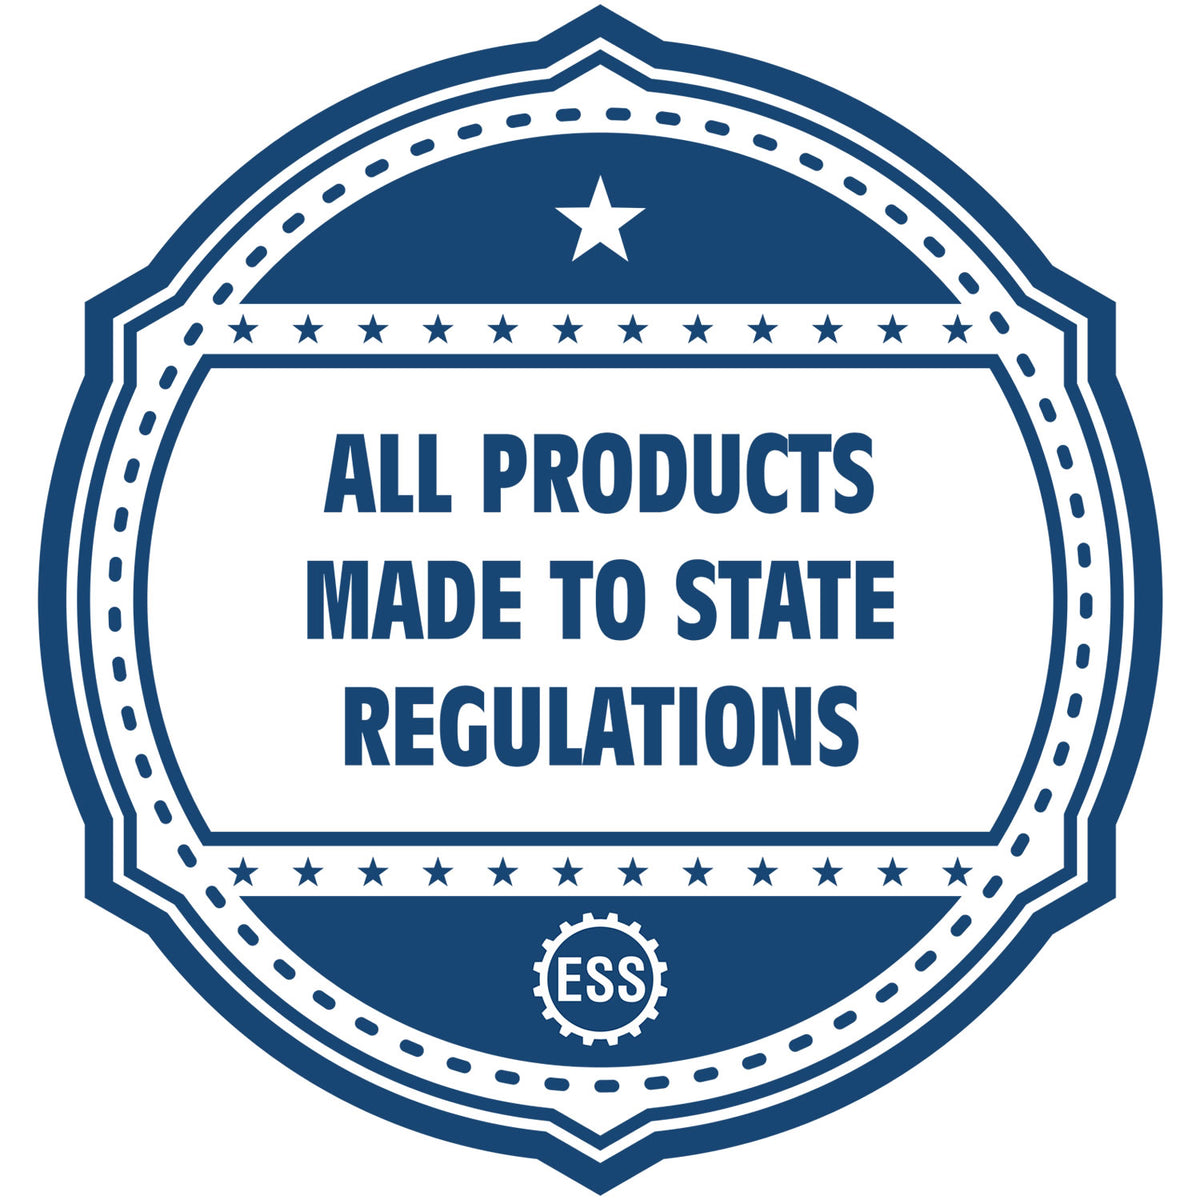 A blue icon or badge for the Self-Inking South Carolina Geologist Stamp showing that this product is made in compliance with state regulations.